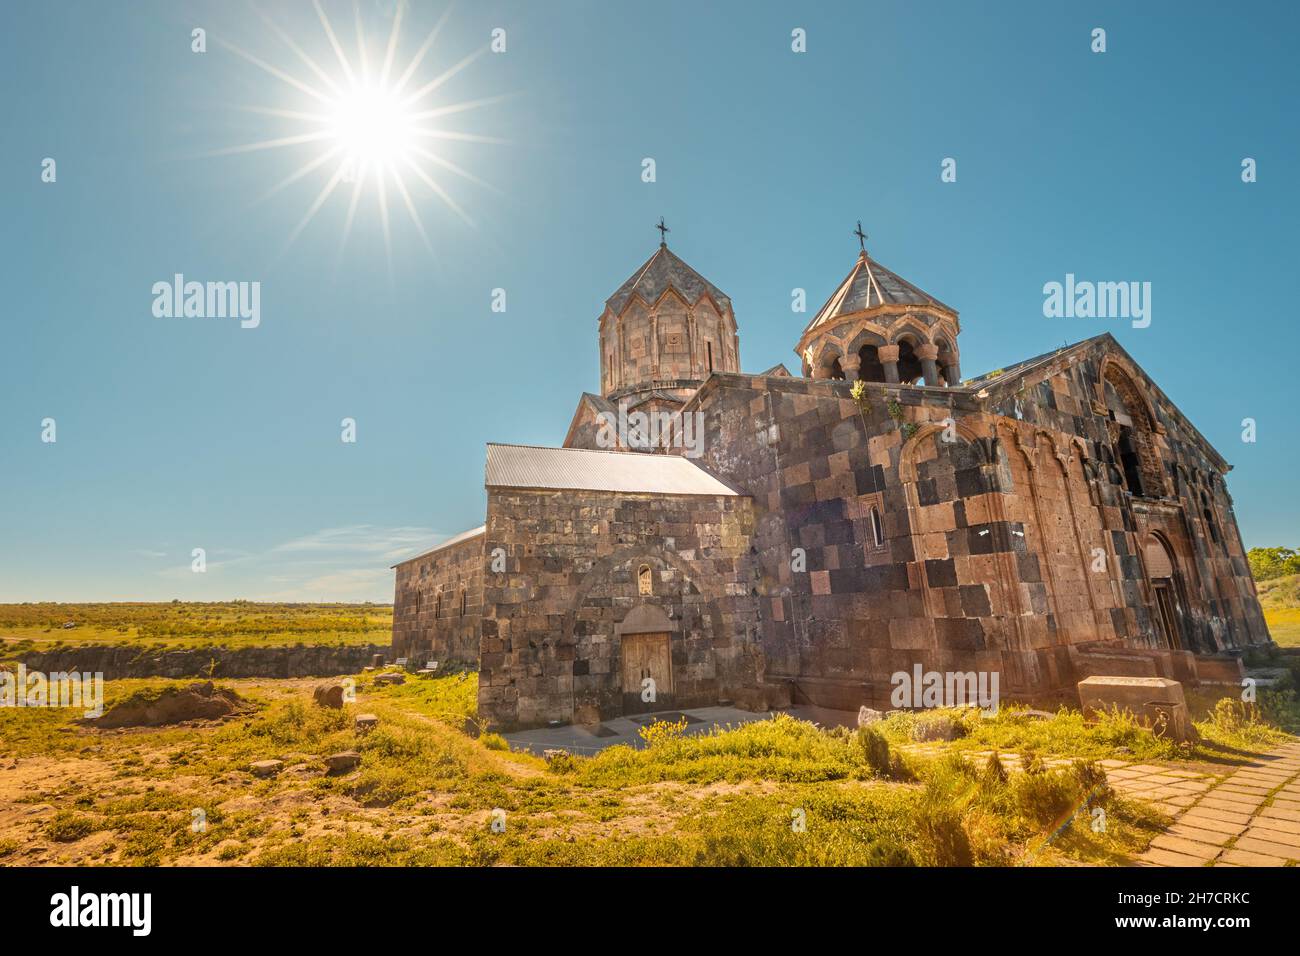 Hovhannavank monastery and church exterior against bright sun background. Travel and religious destinations and attractions in Armenia Stock Photo